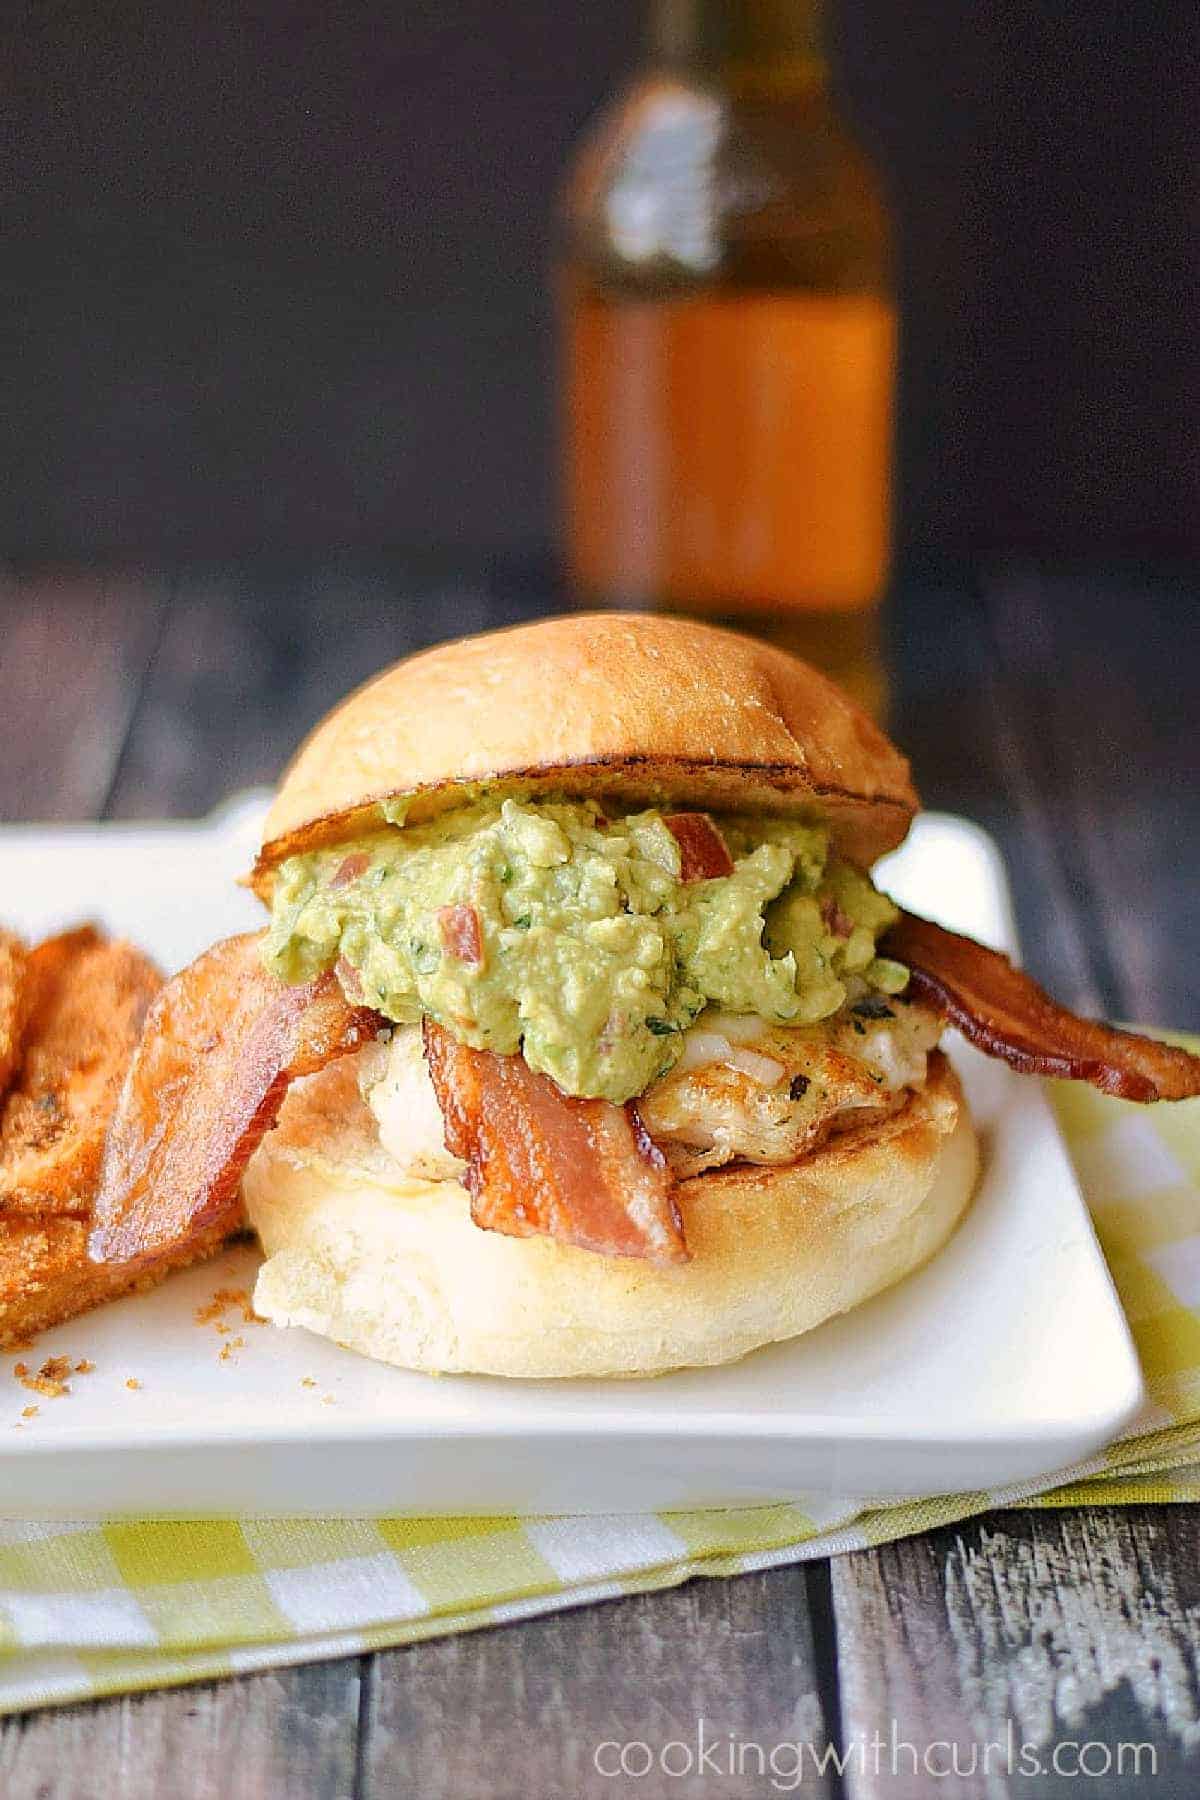 Chicken breast topped with melted cheese, bacon slices, and guacamole on a hamburger bun.